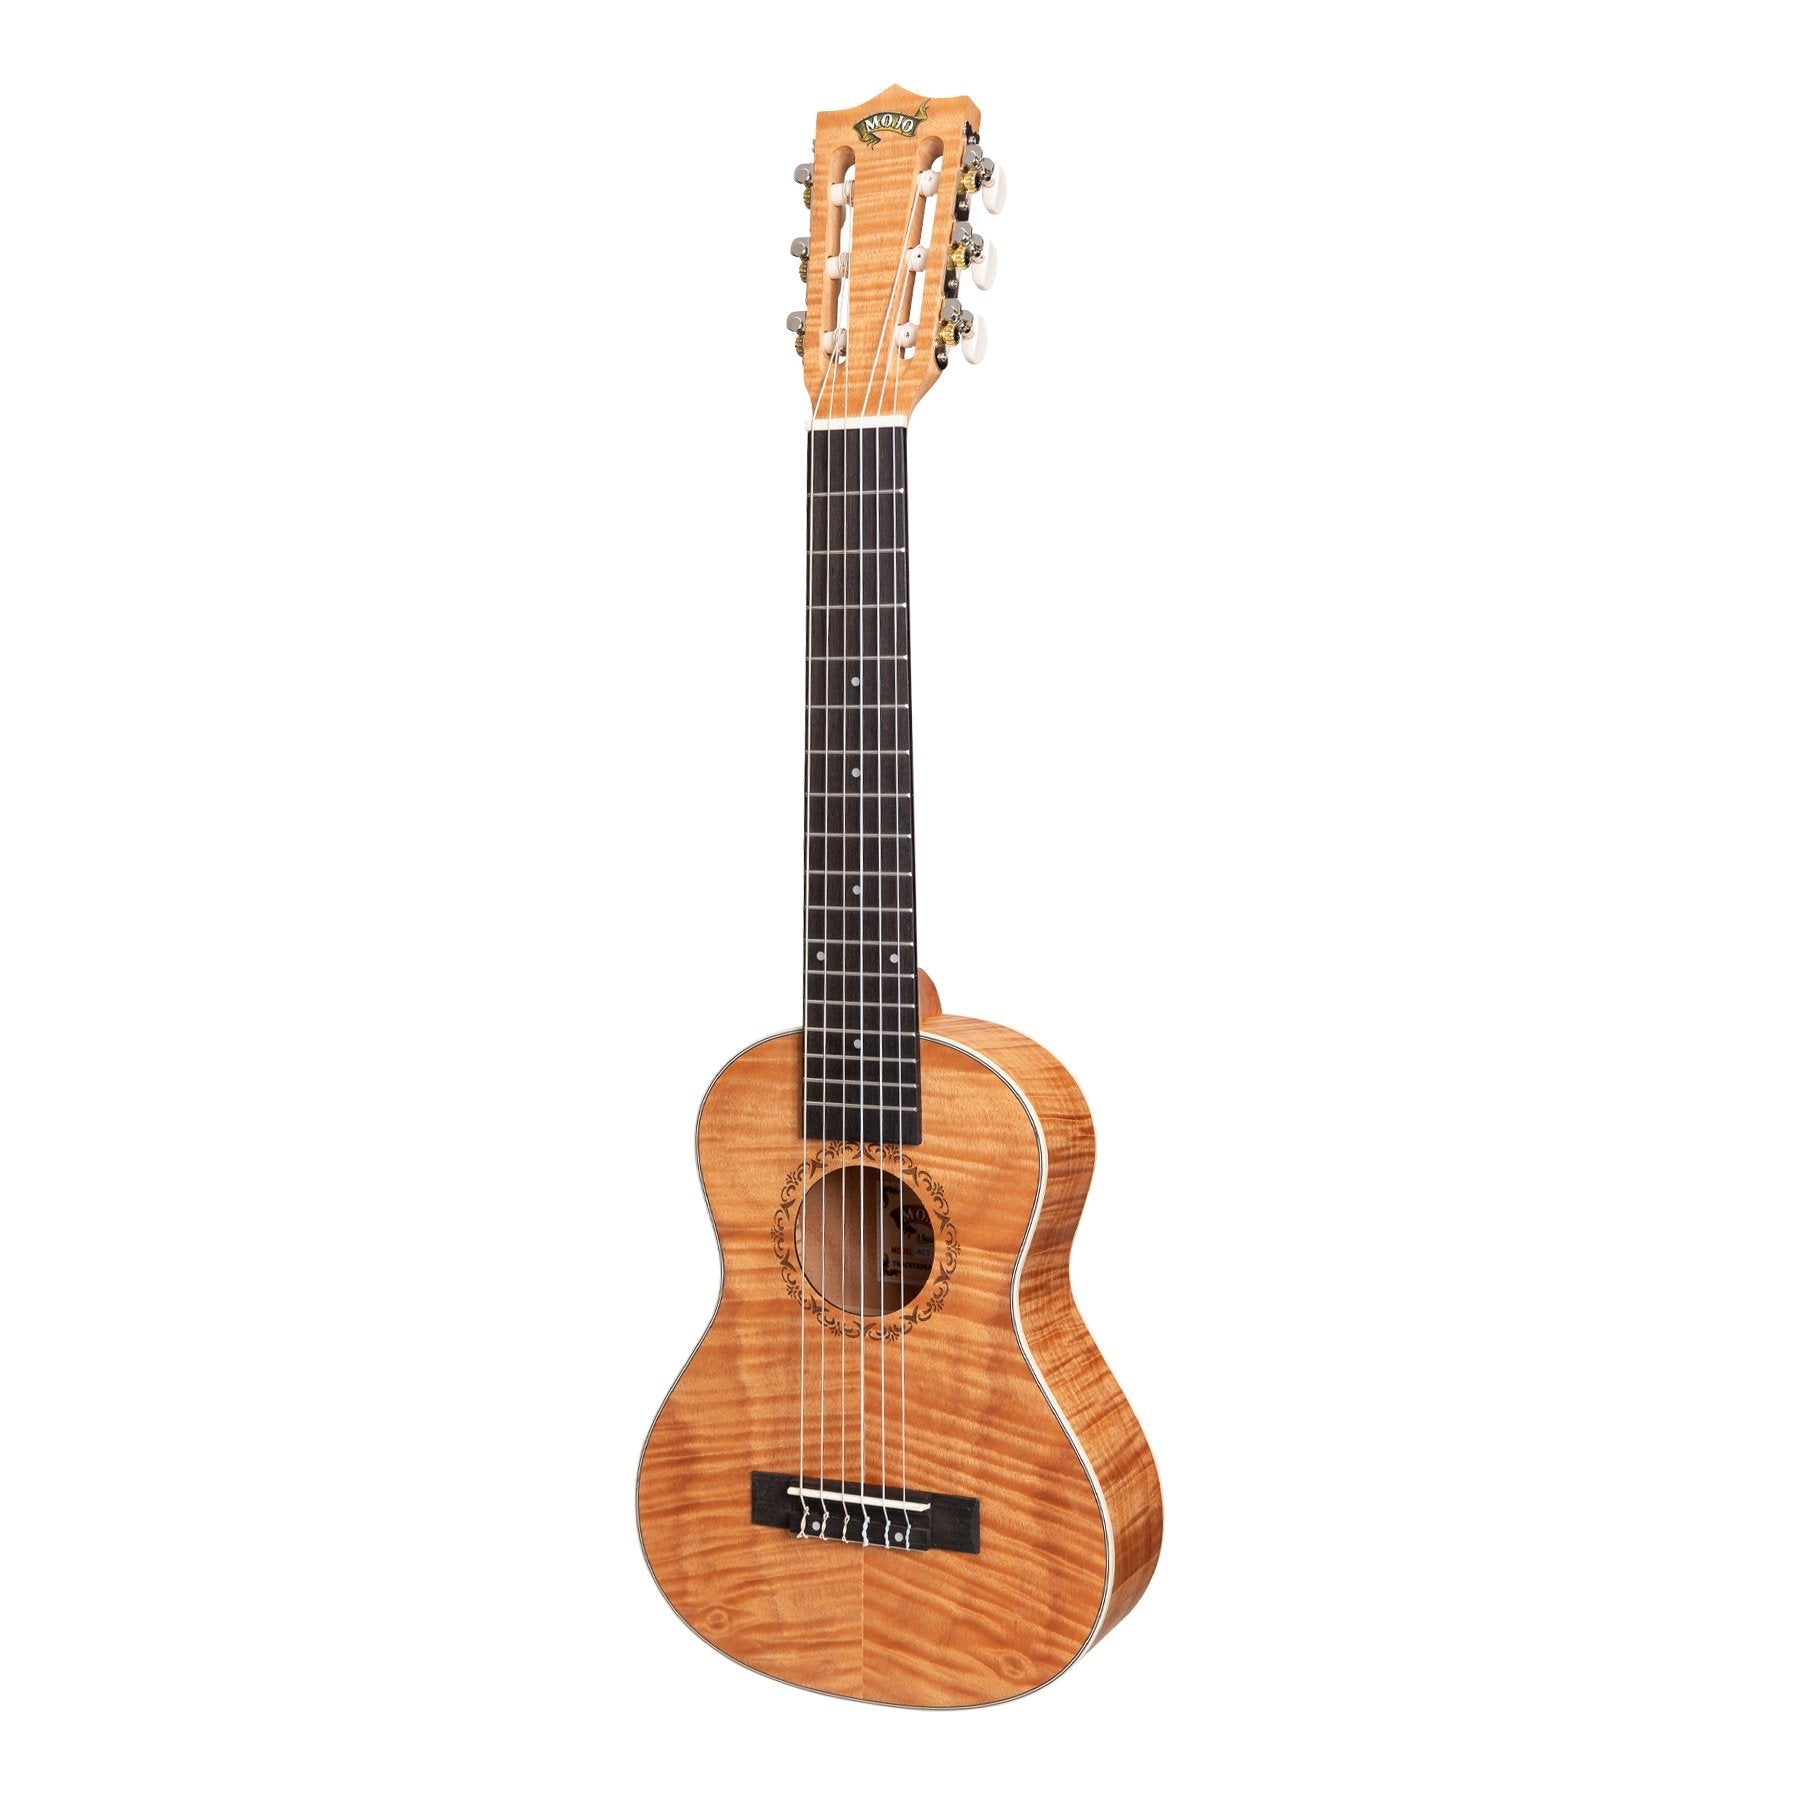 Mojo Quilted Maple 30" Guitarulele with Gig Bag (Natural Satin)-MGT-01-NA